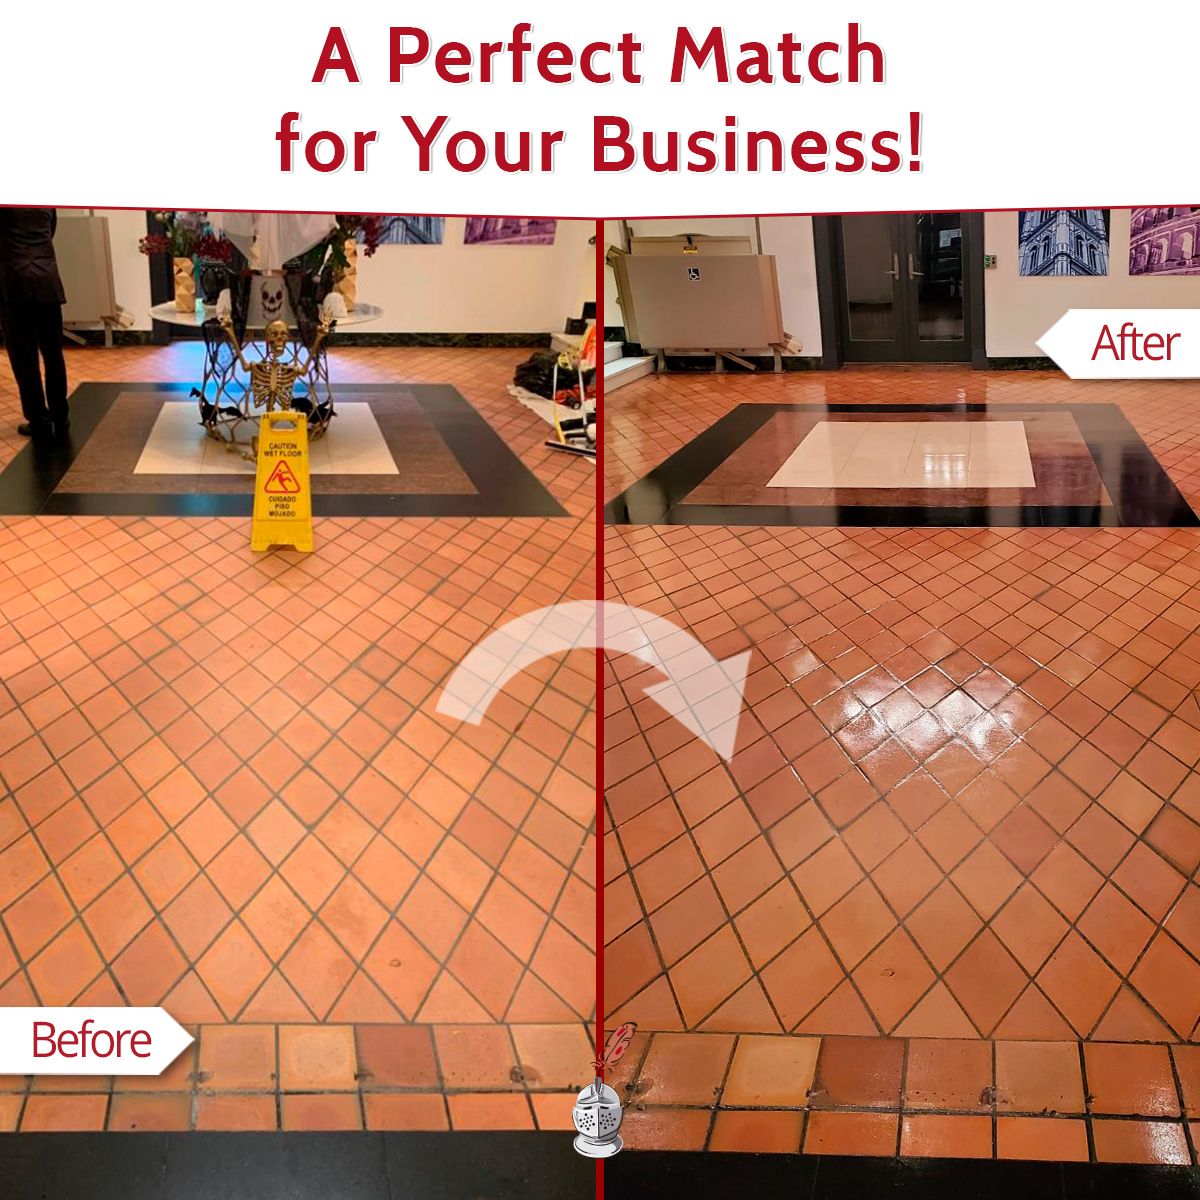 A Perfect Match for Your Business!